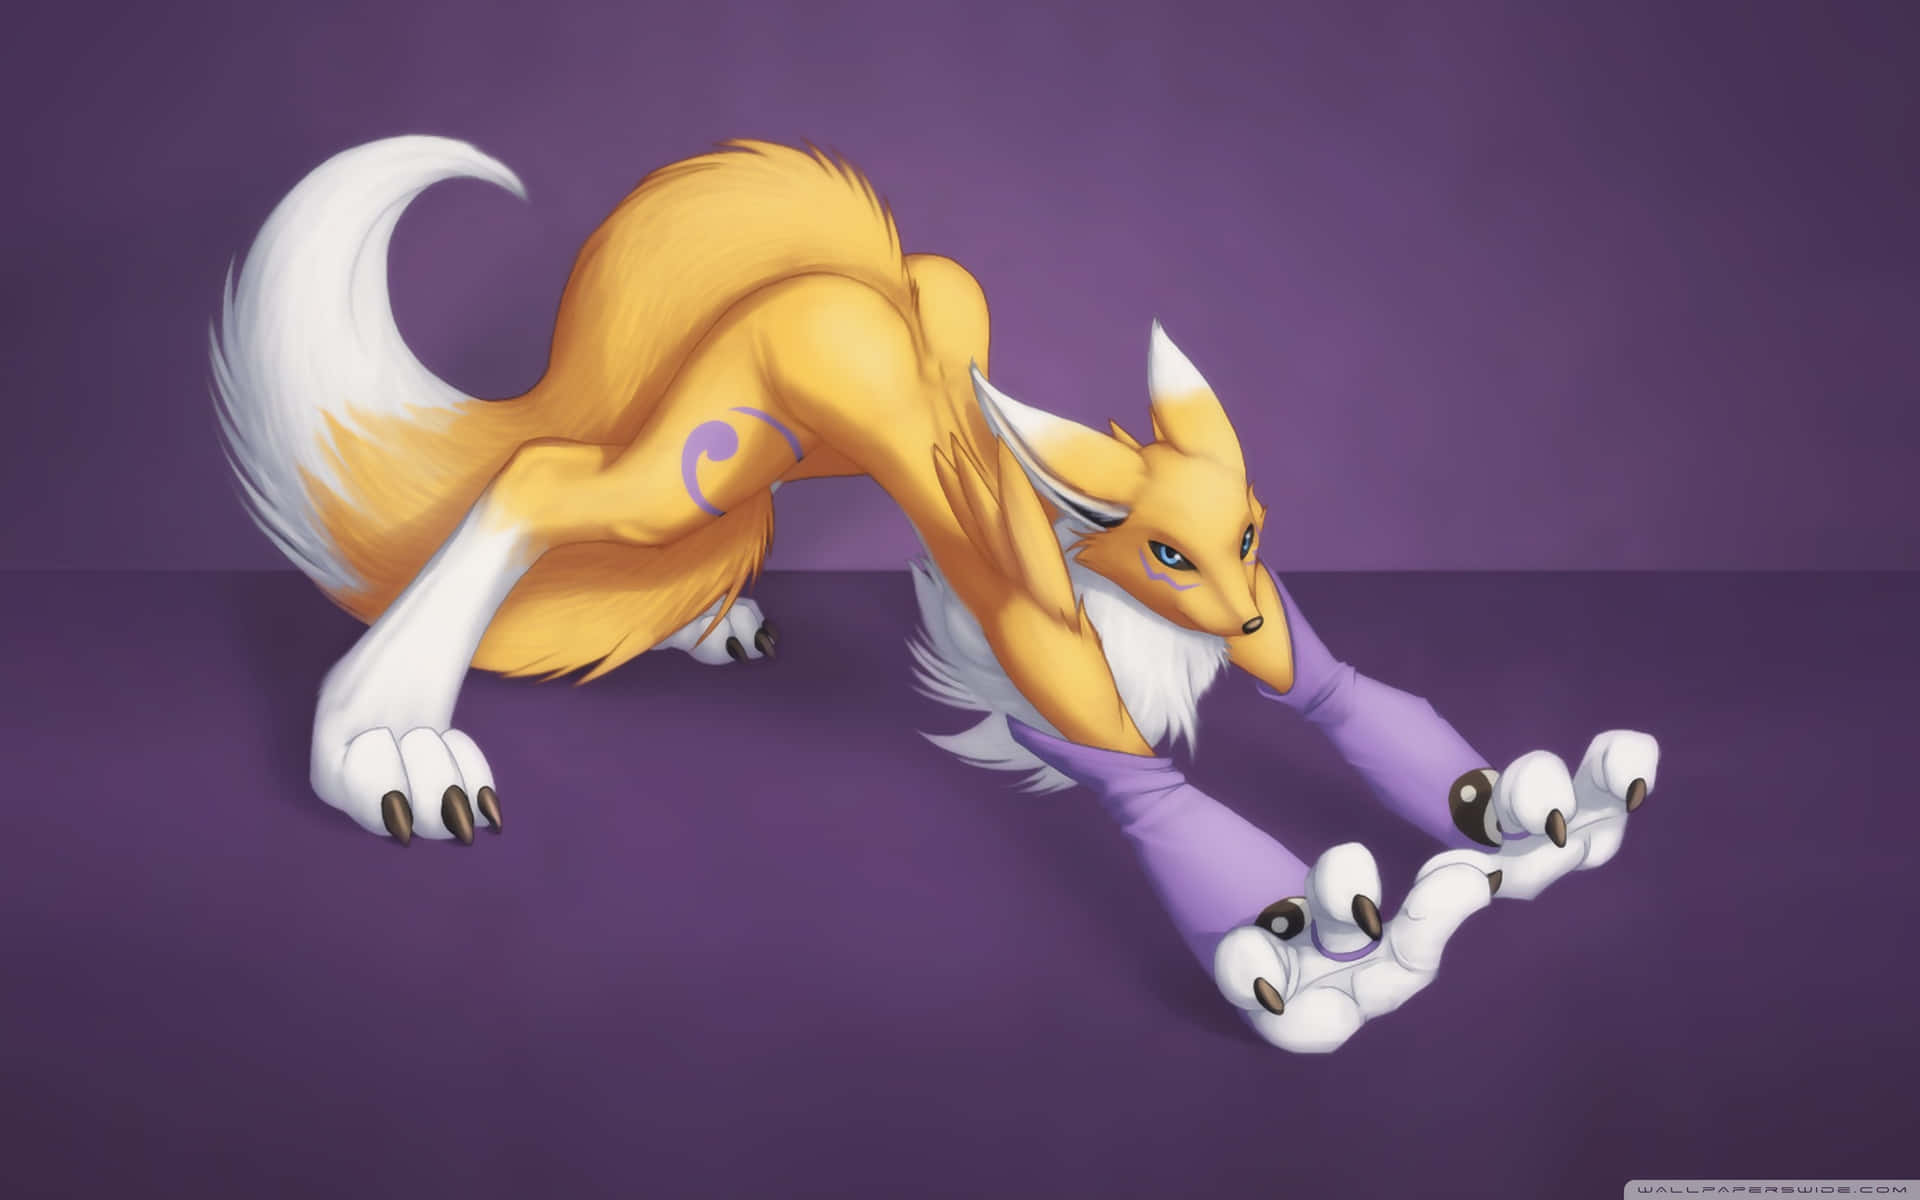 A Fox With Its Legs Stretched Out On A Purple Background Wallpaper